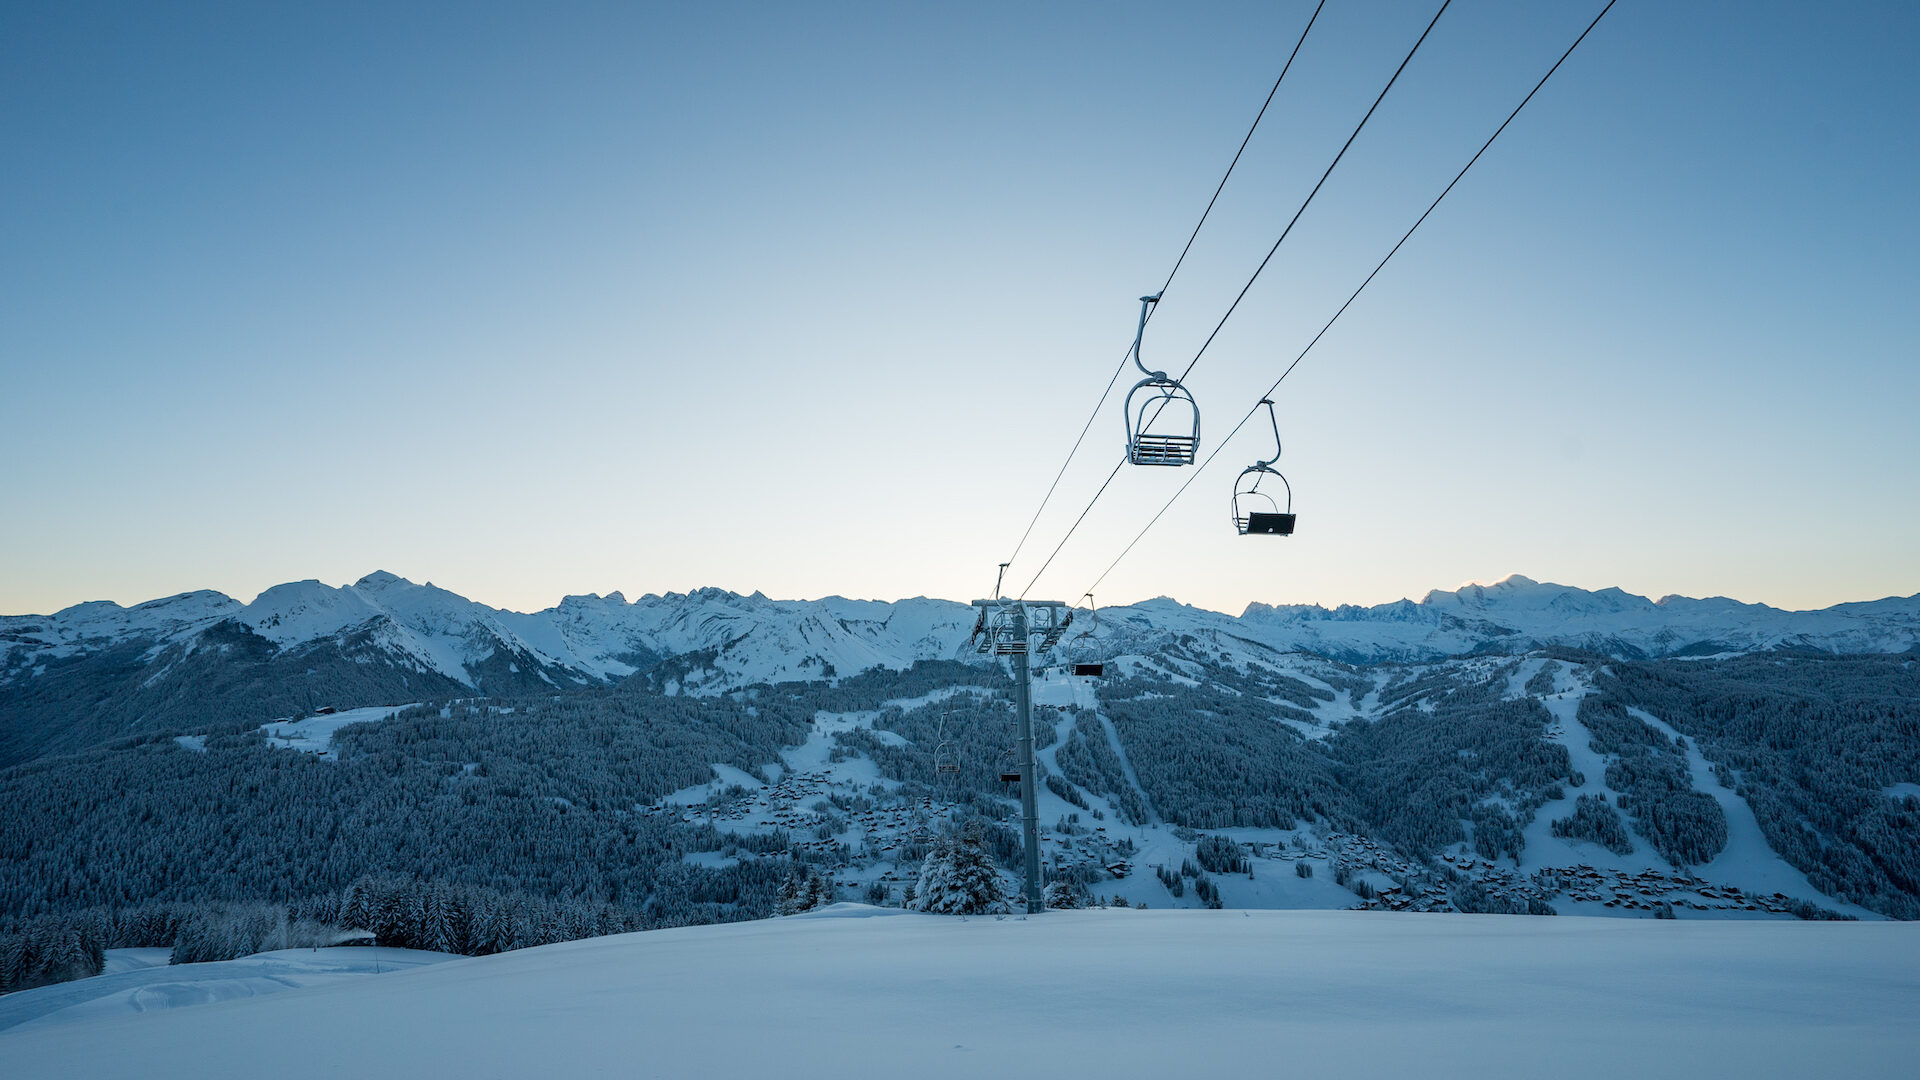 Mountain landscape in winter with ski lifts